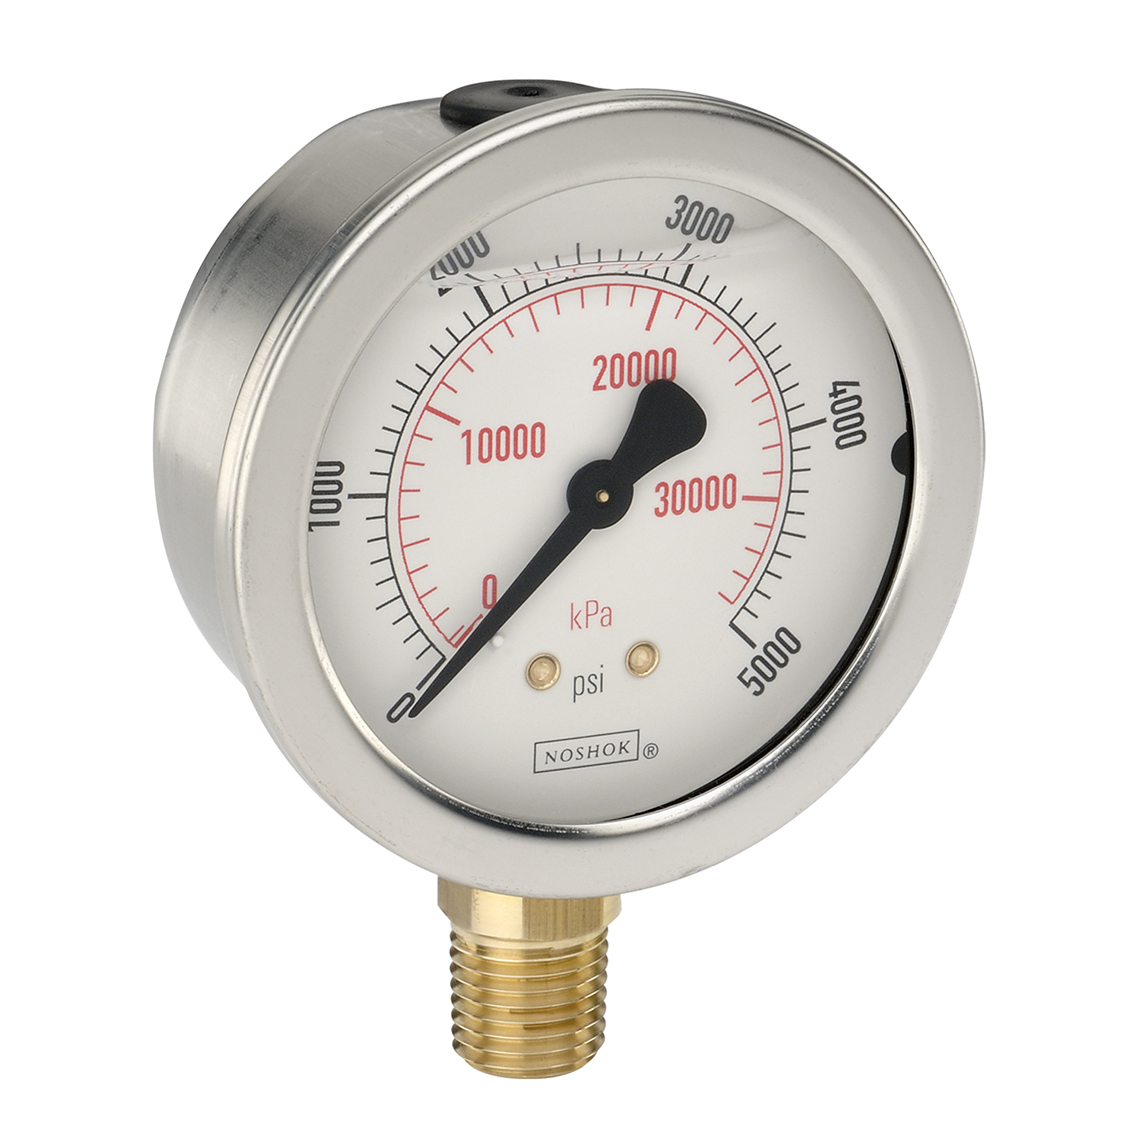 25-901-3000-psi/bar 900 Series ABS and Stainless Steel Liquid Filled Pressure Gauges